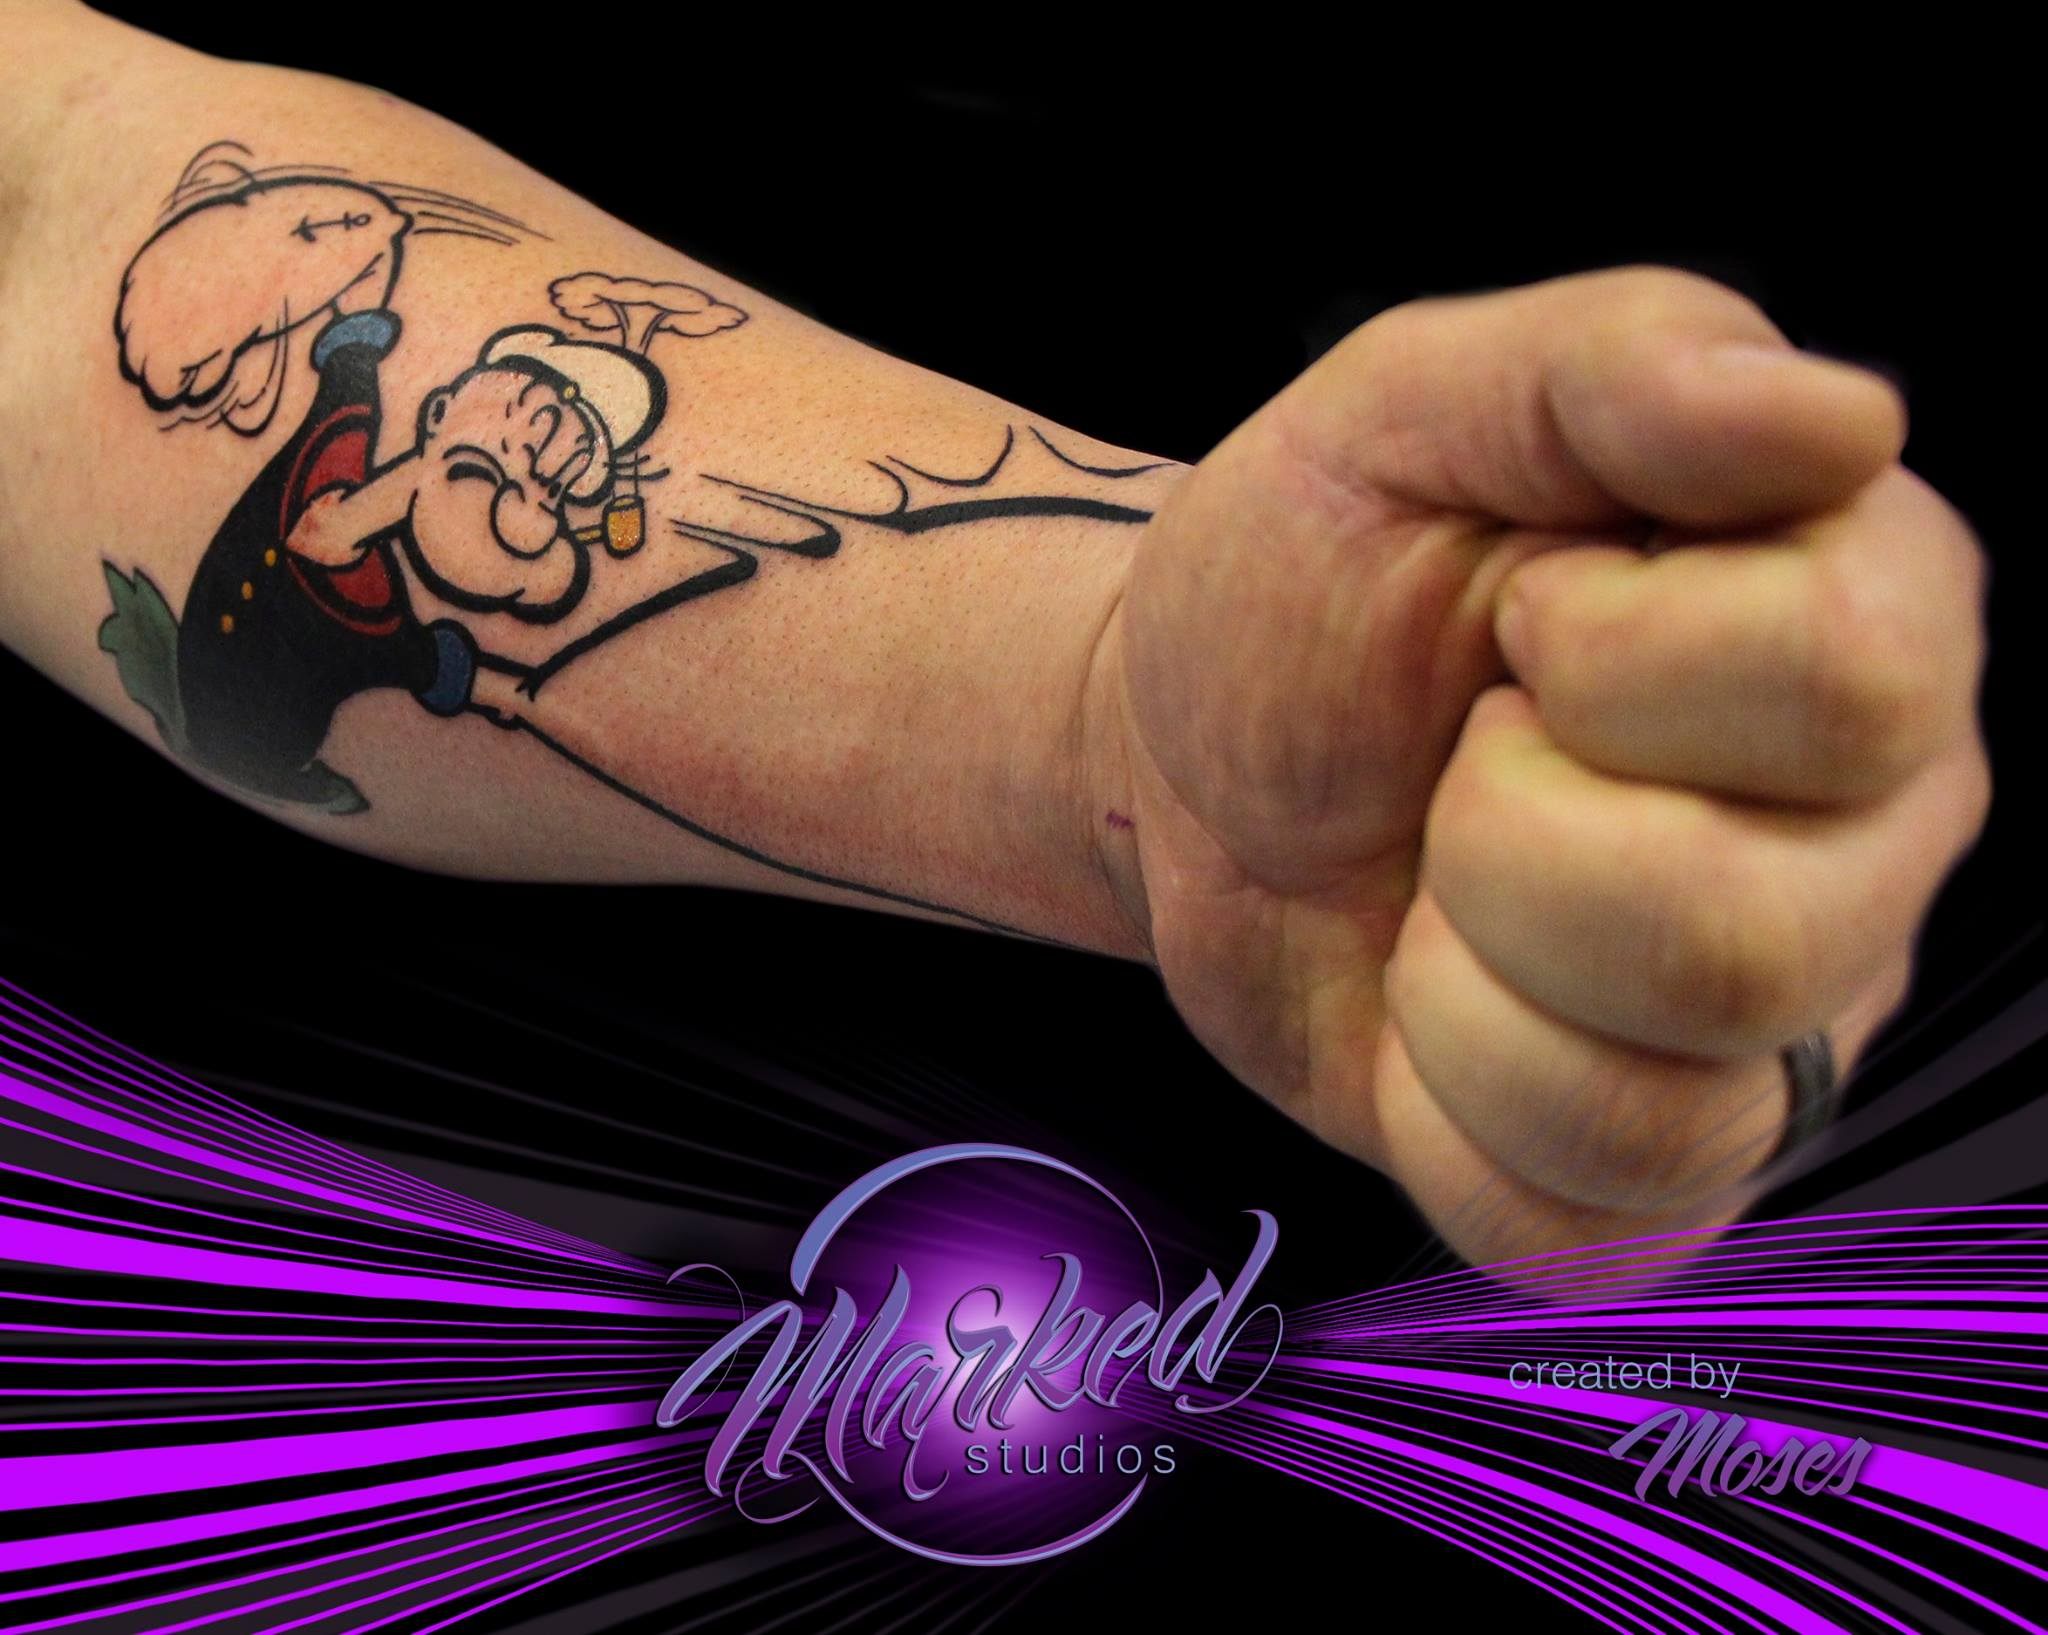 Marked Studios An Awesome Take On The Popeye Arm Tattoo Moses inside dimensions 2048 X 1635